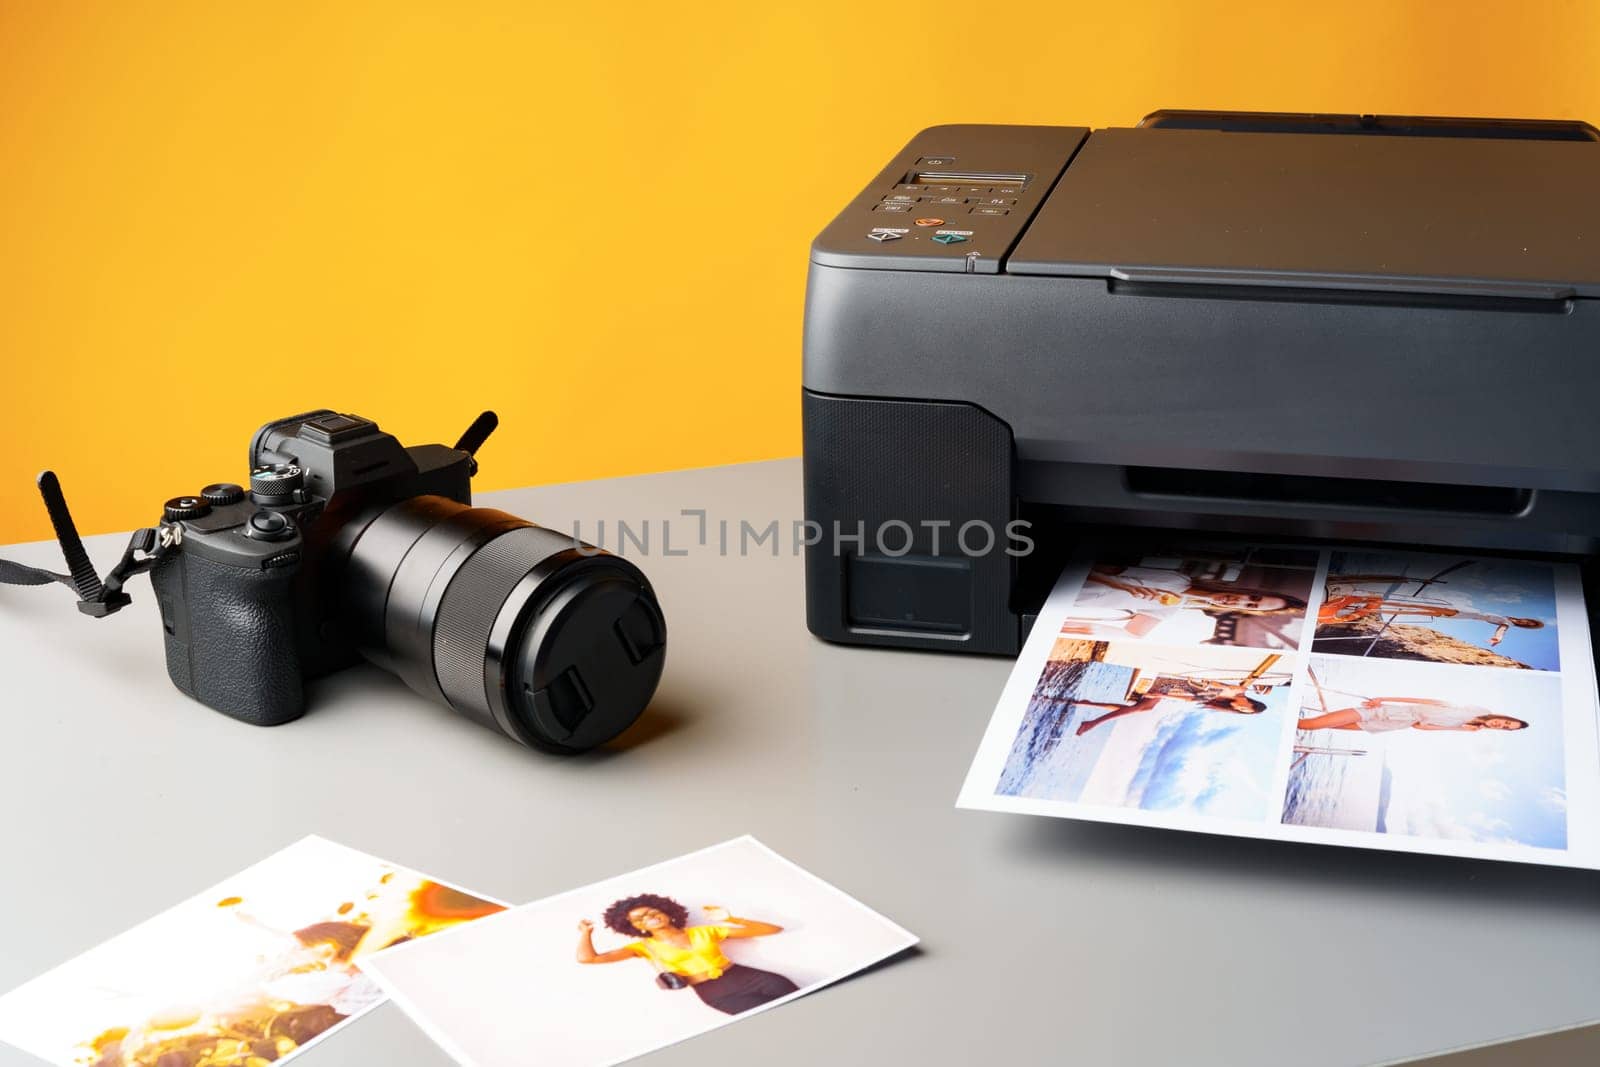 Printer printing colorful photos of people close up, yellow background, studio shot